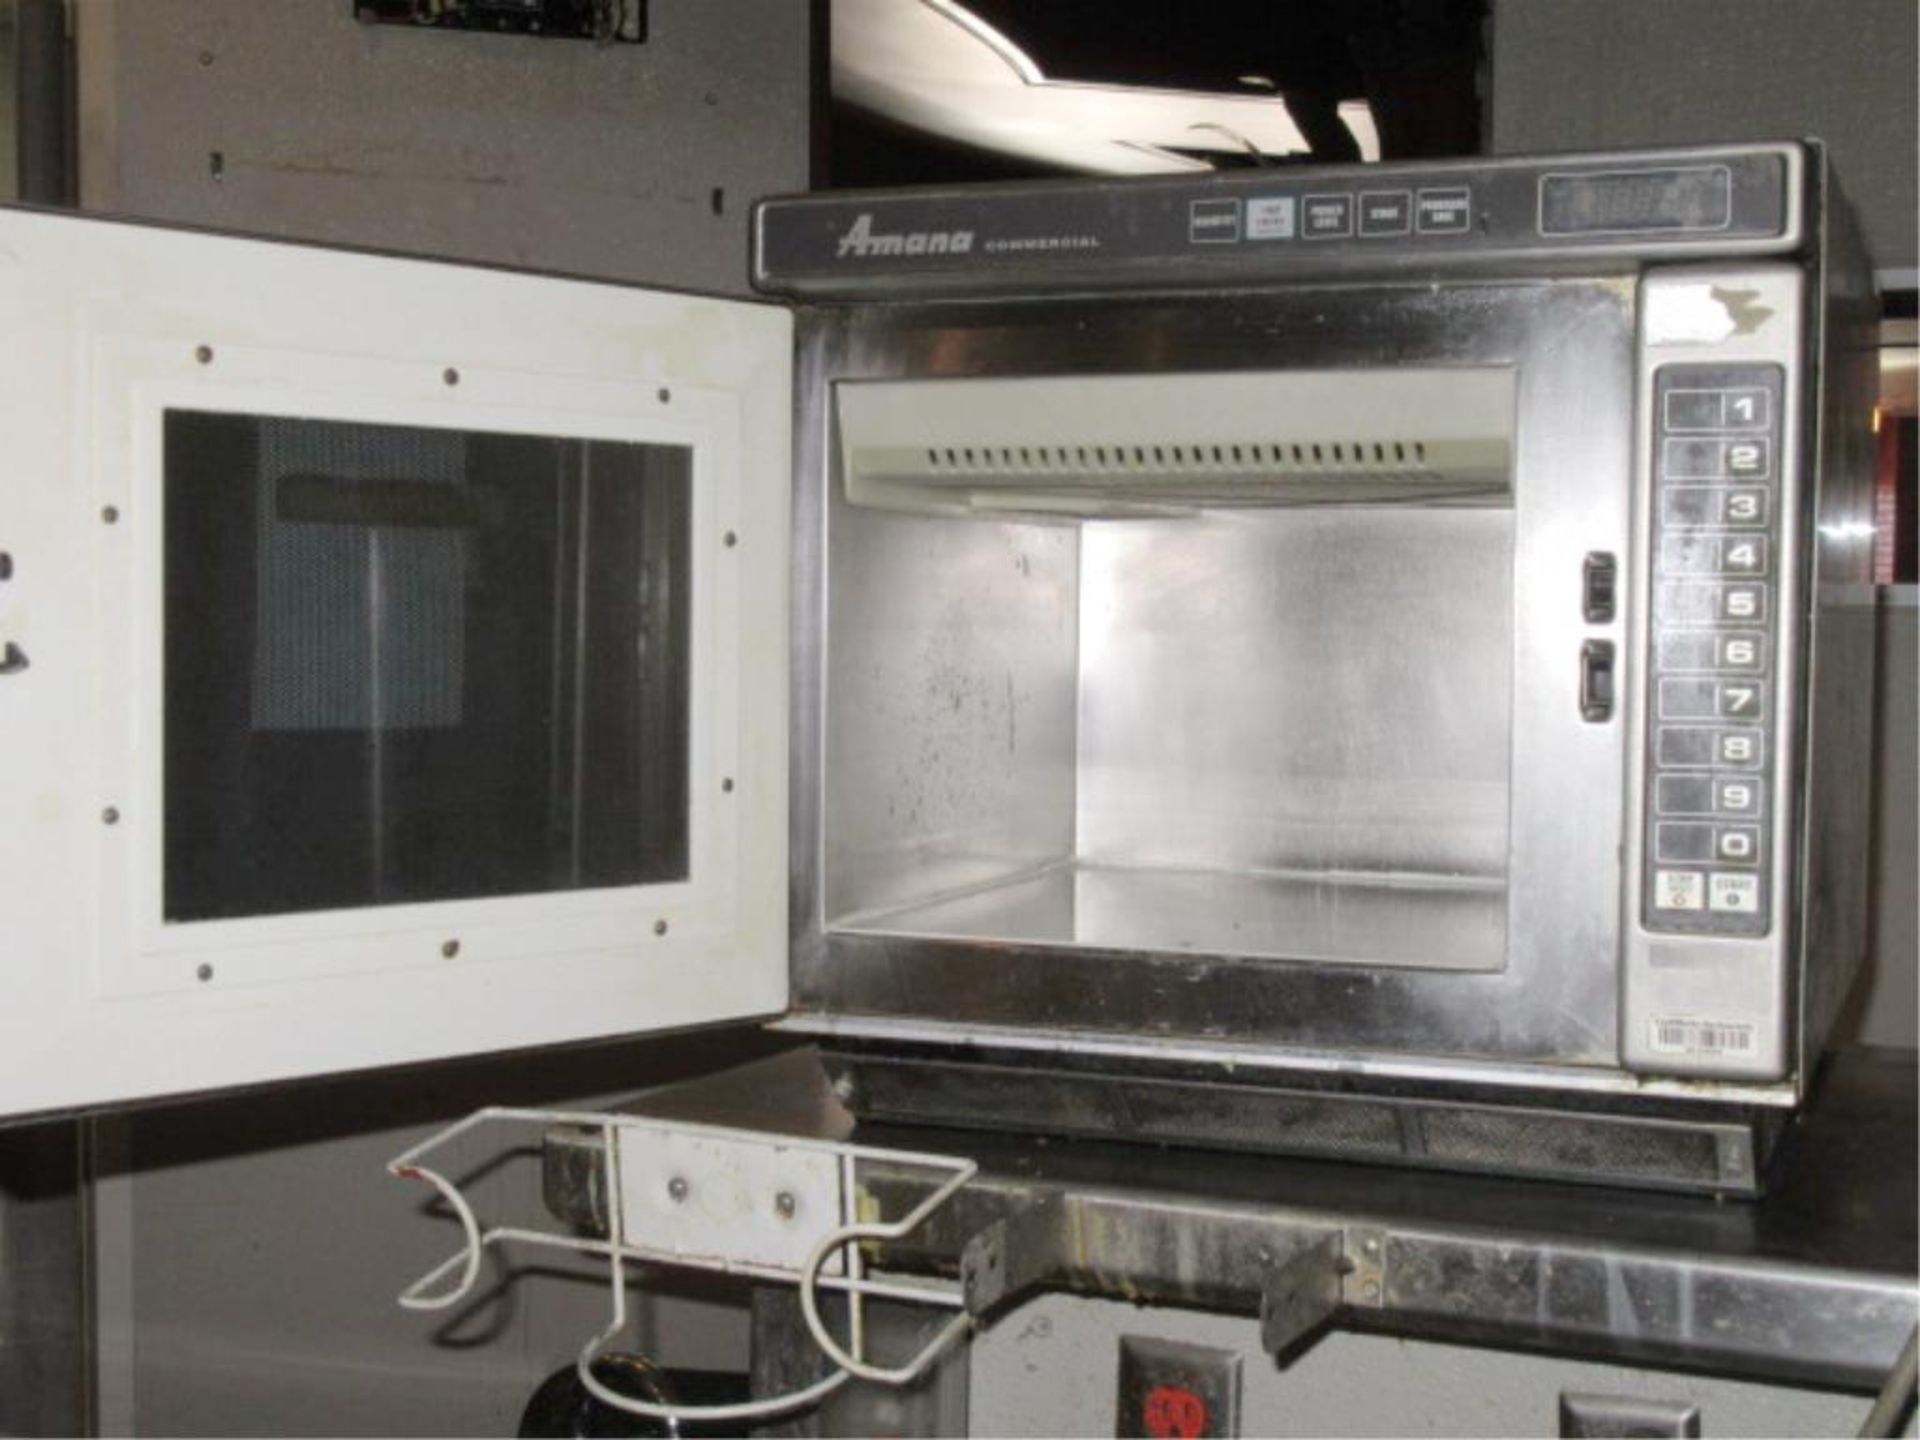 Microwave Oven - Image 4 of 4